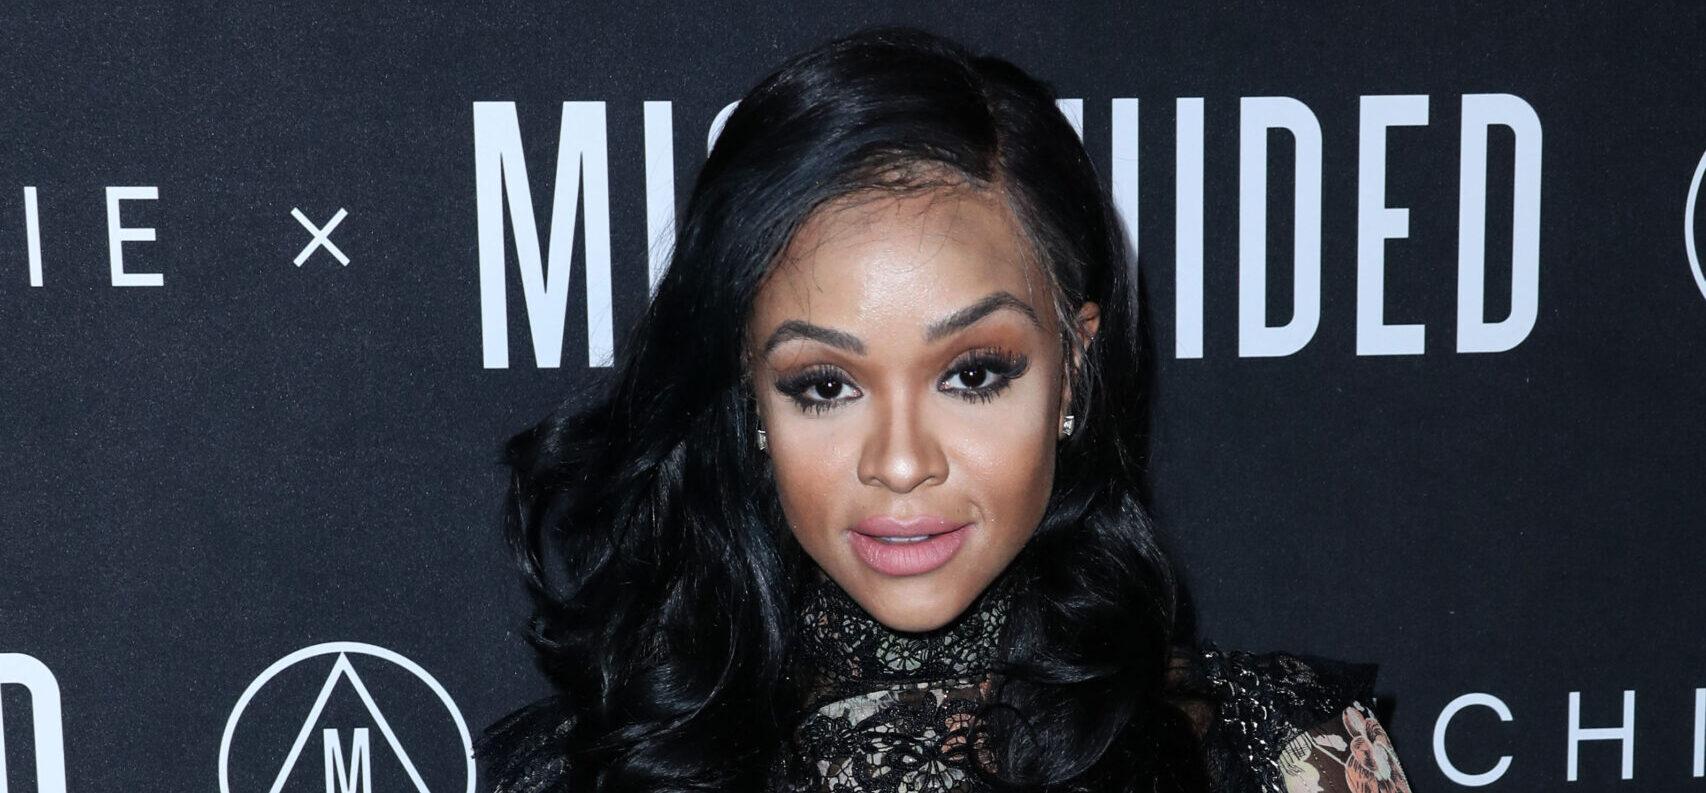 'Love & Hip Hop: Hollywood' Star Masika Kalysha Files To Annul Her Marriage